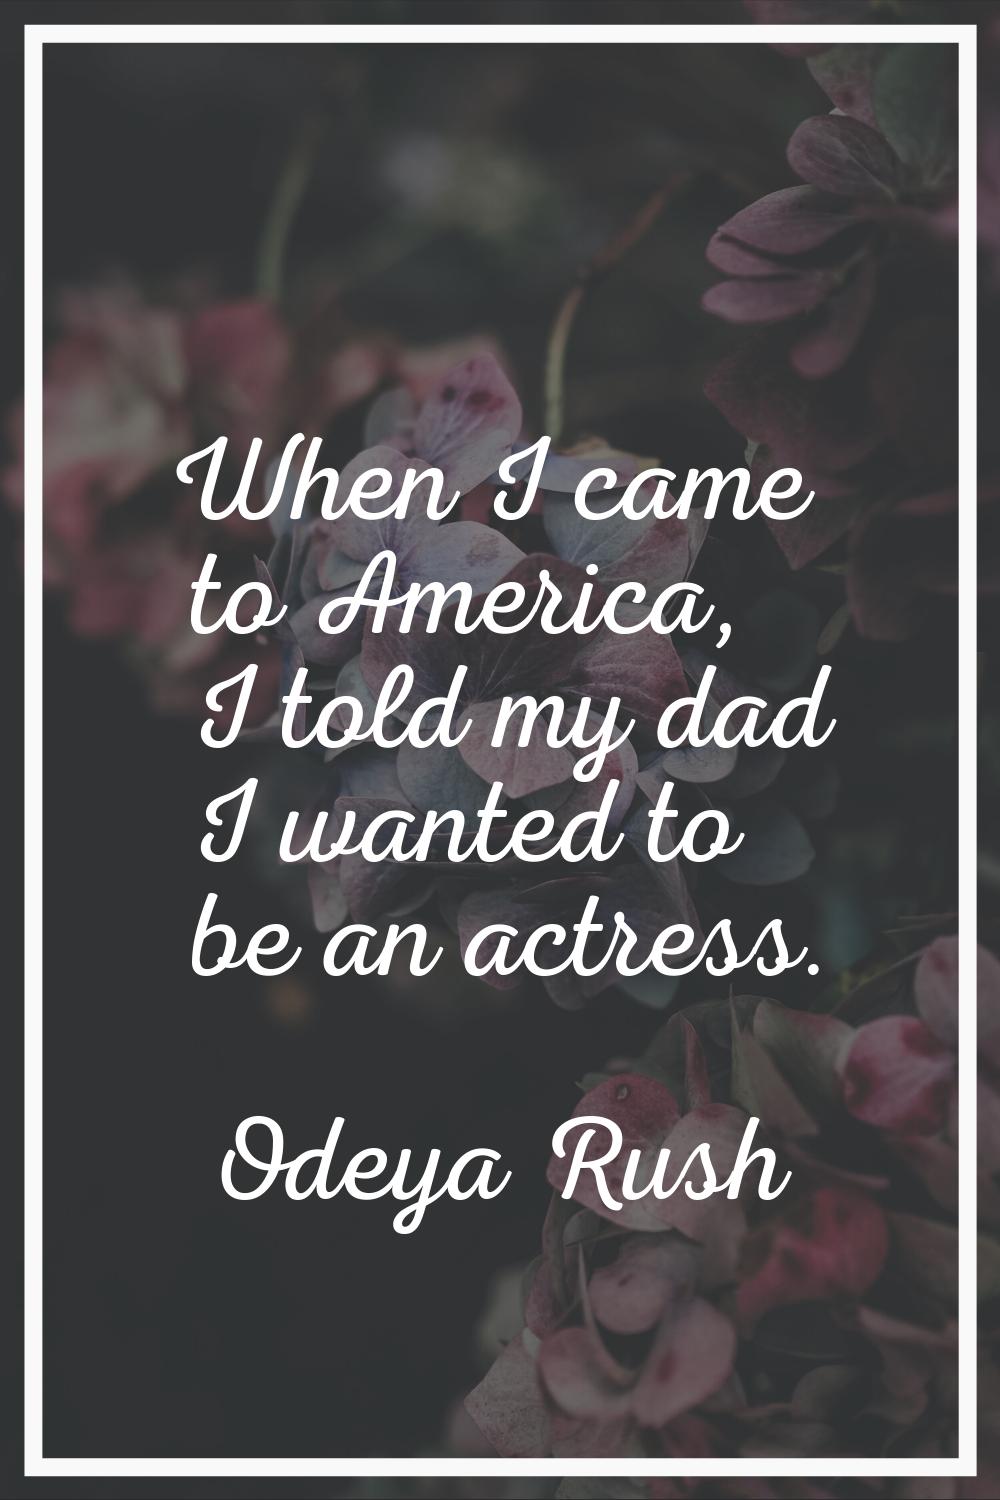 When I came to America, I told my dad I wanted to be an actress.